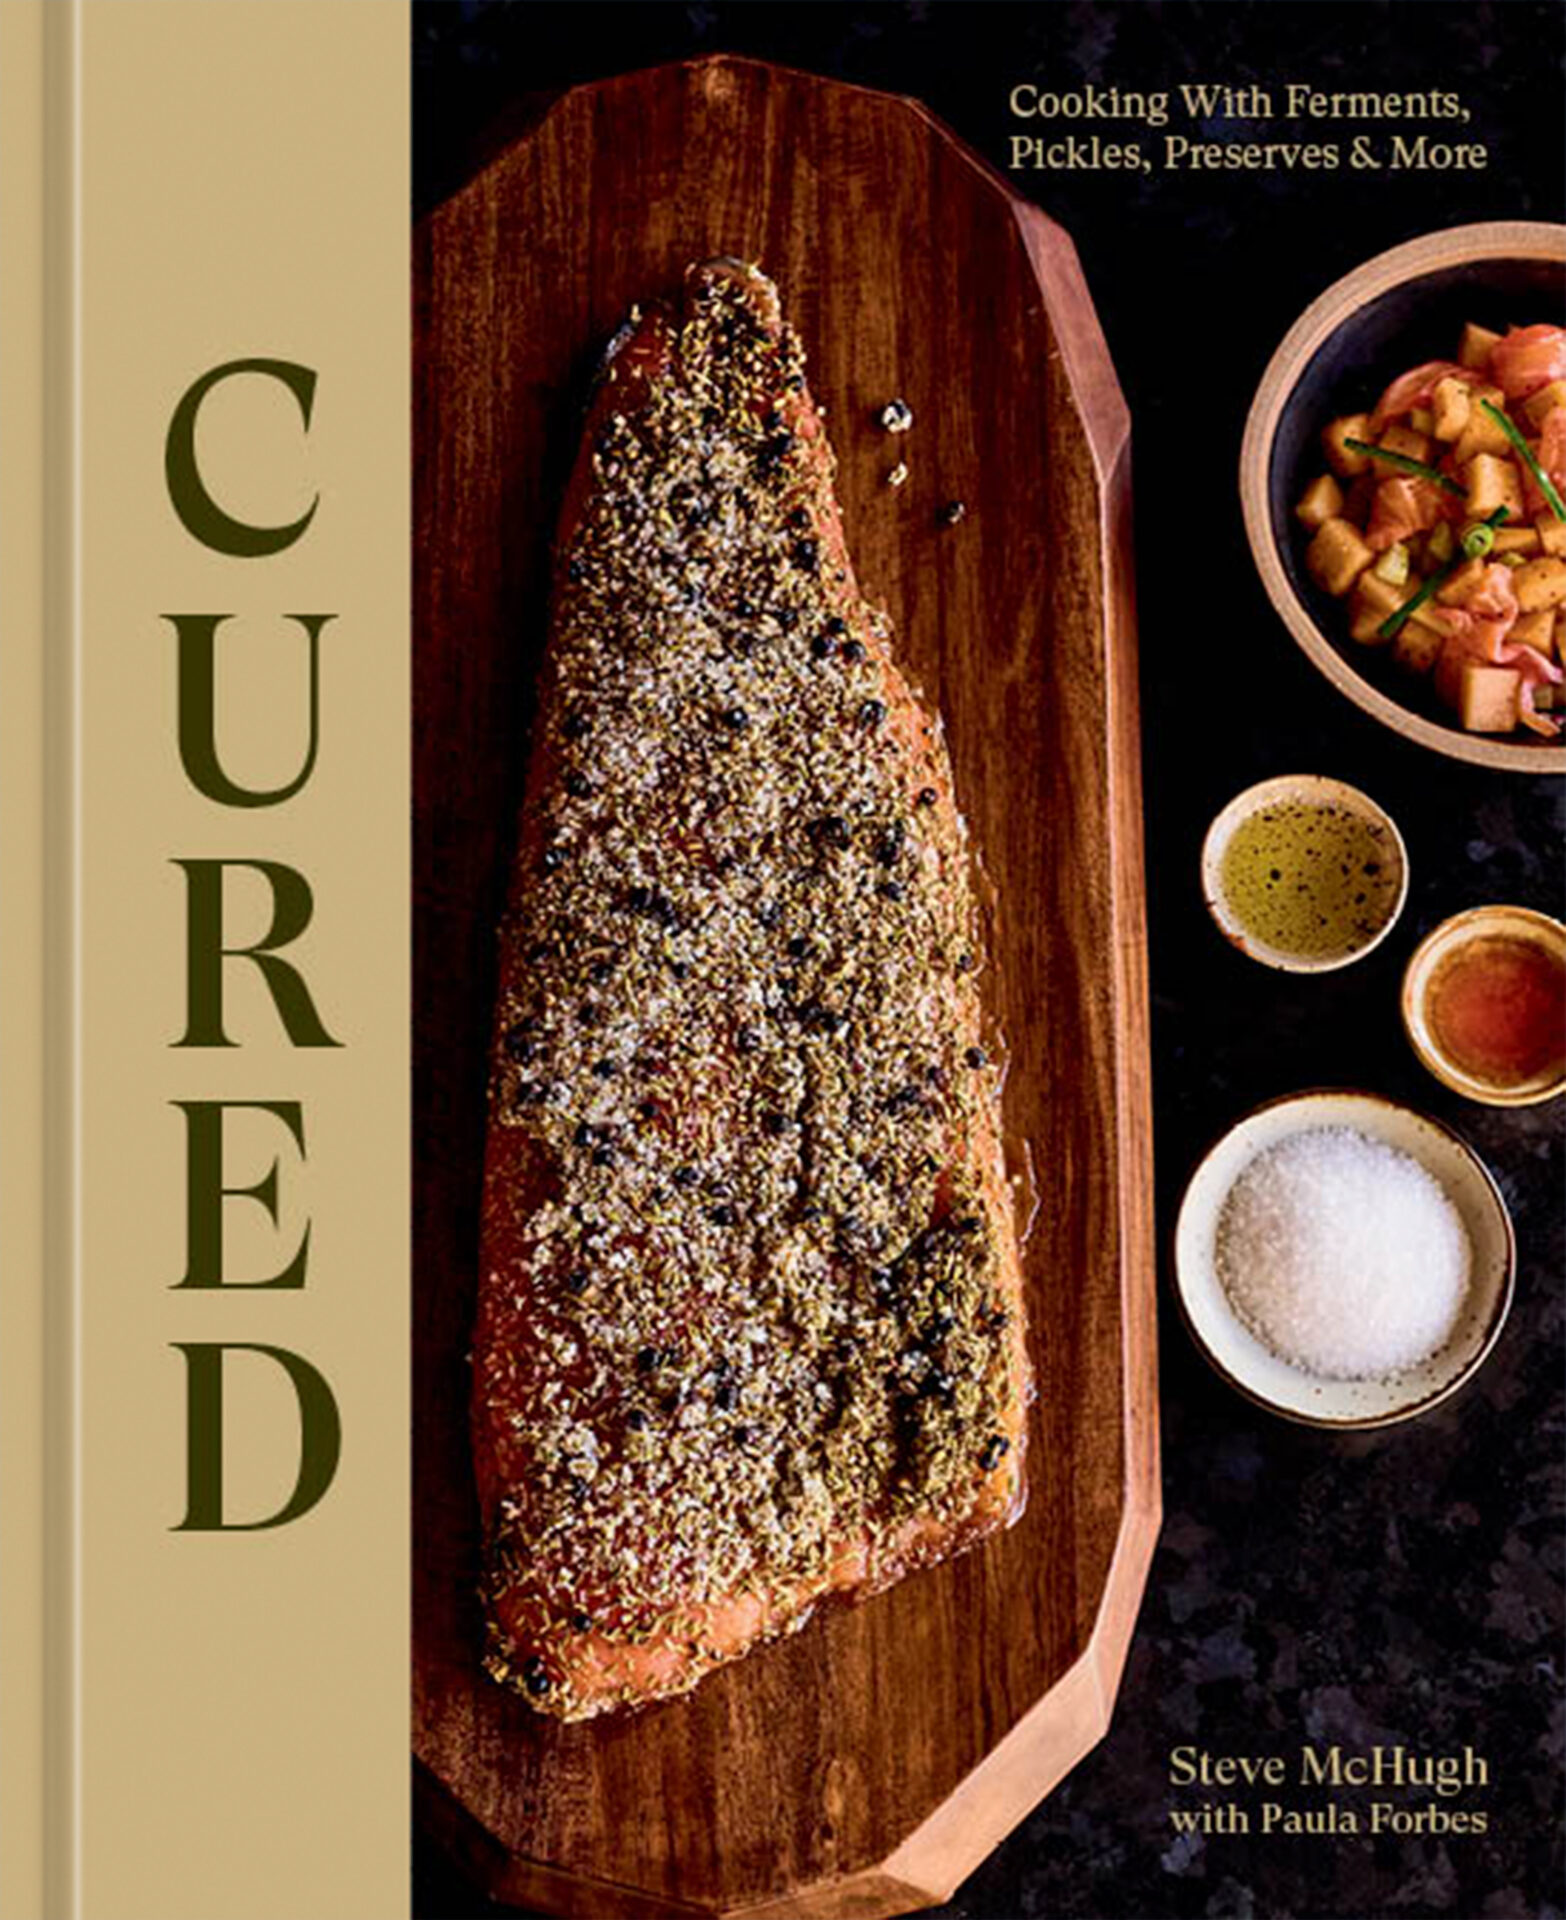 Cured Cover, one of 9 best southern cookbooks this spring